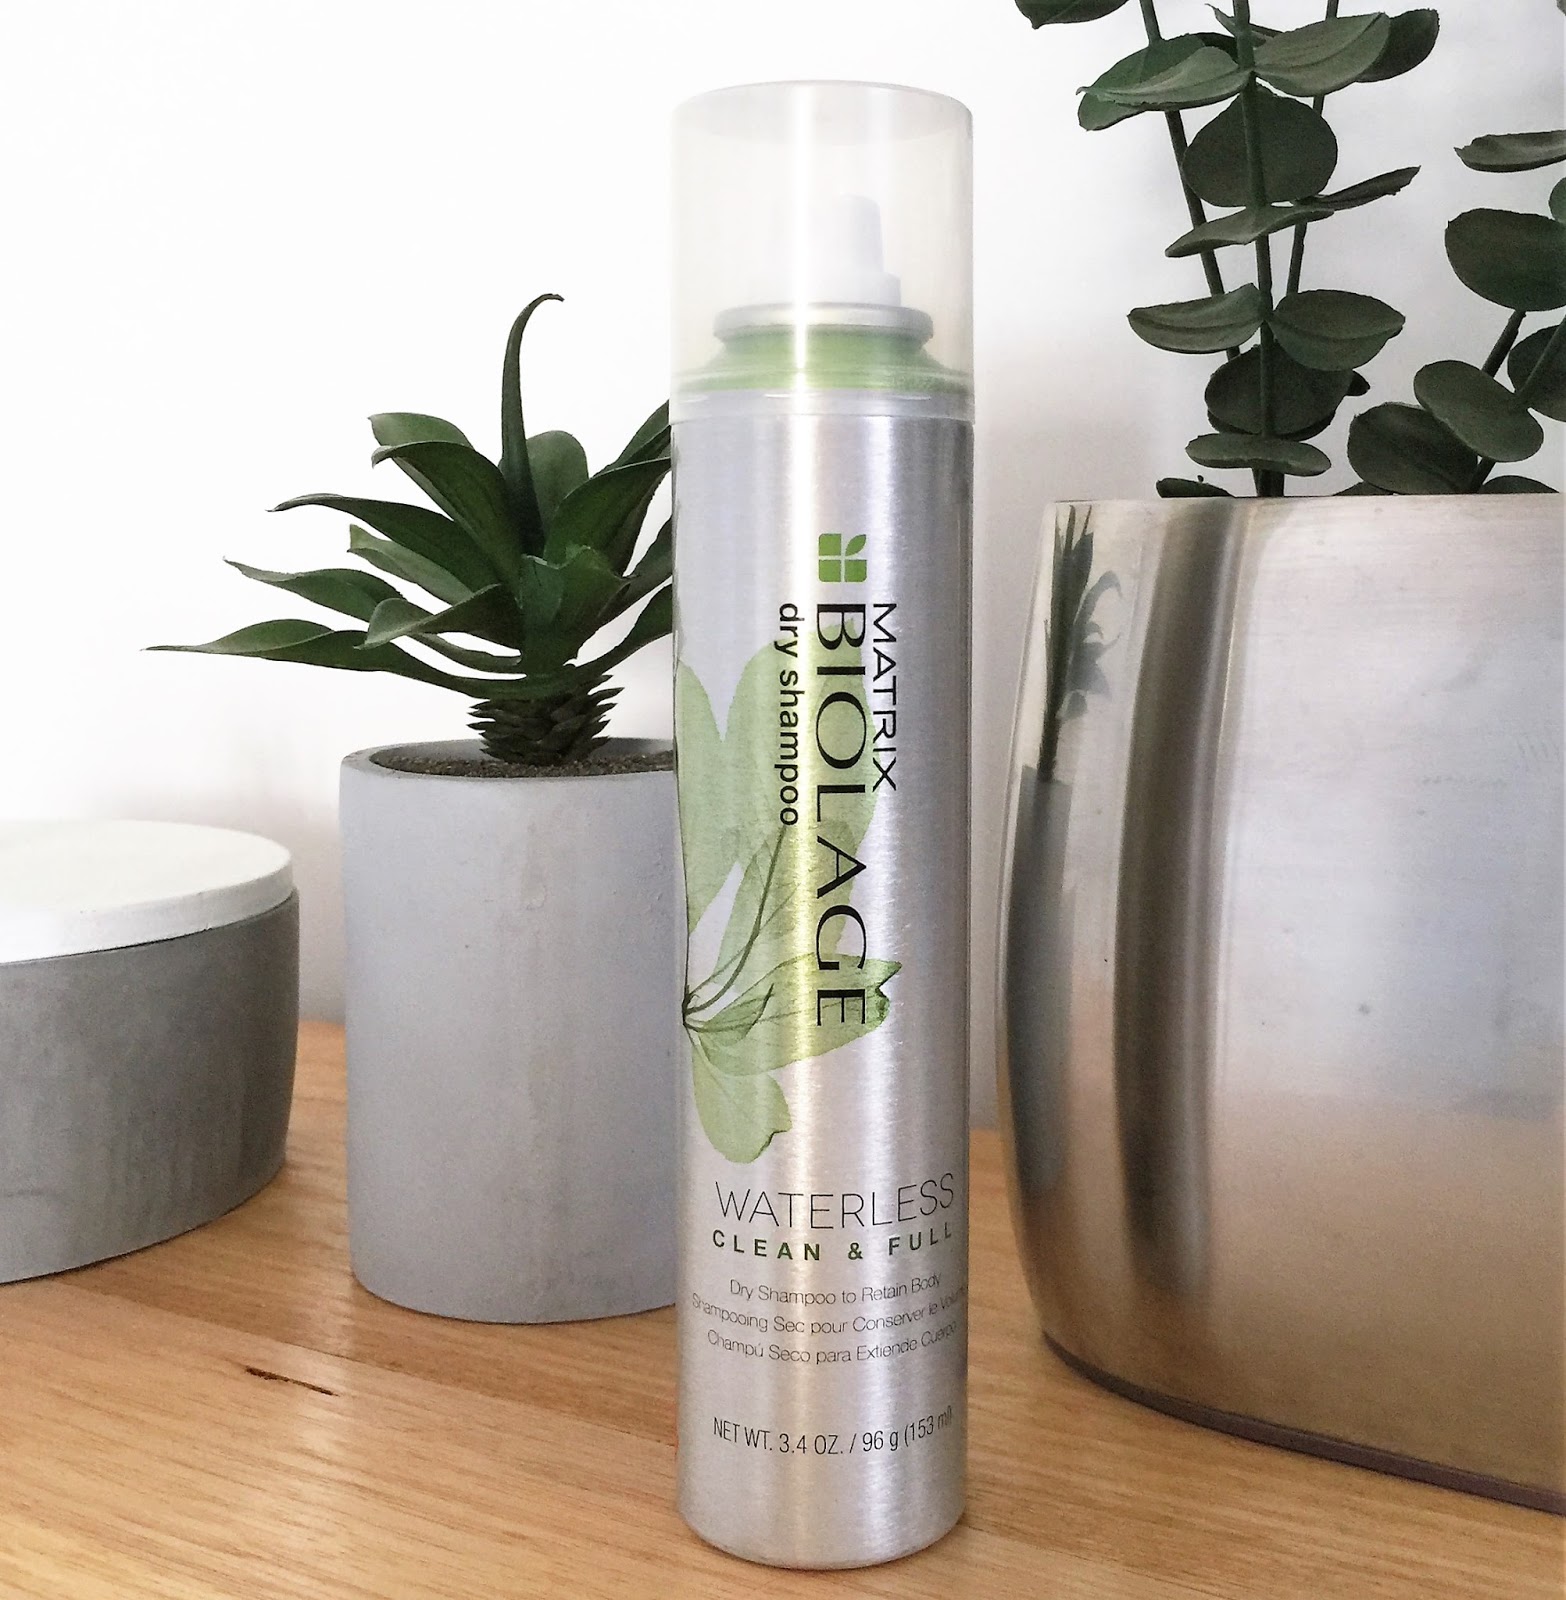 PRODUCT REVIEW: MATRIX BIOLAGE WATERLESS CLEAN AND FULL DRY SHAMPOO | The  Beauty & Lifestyle Hunter